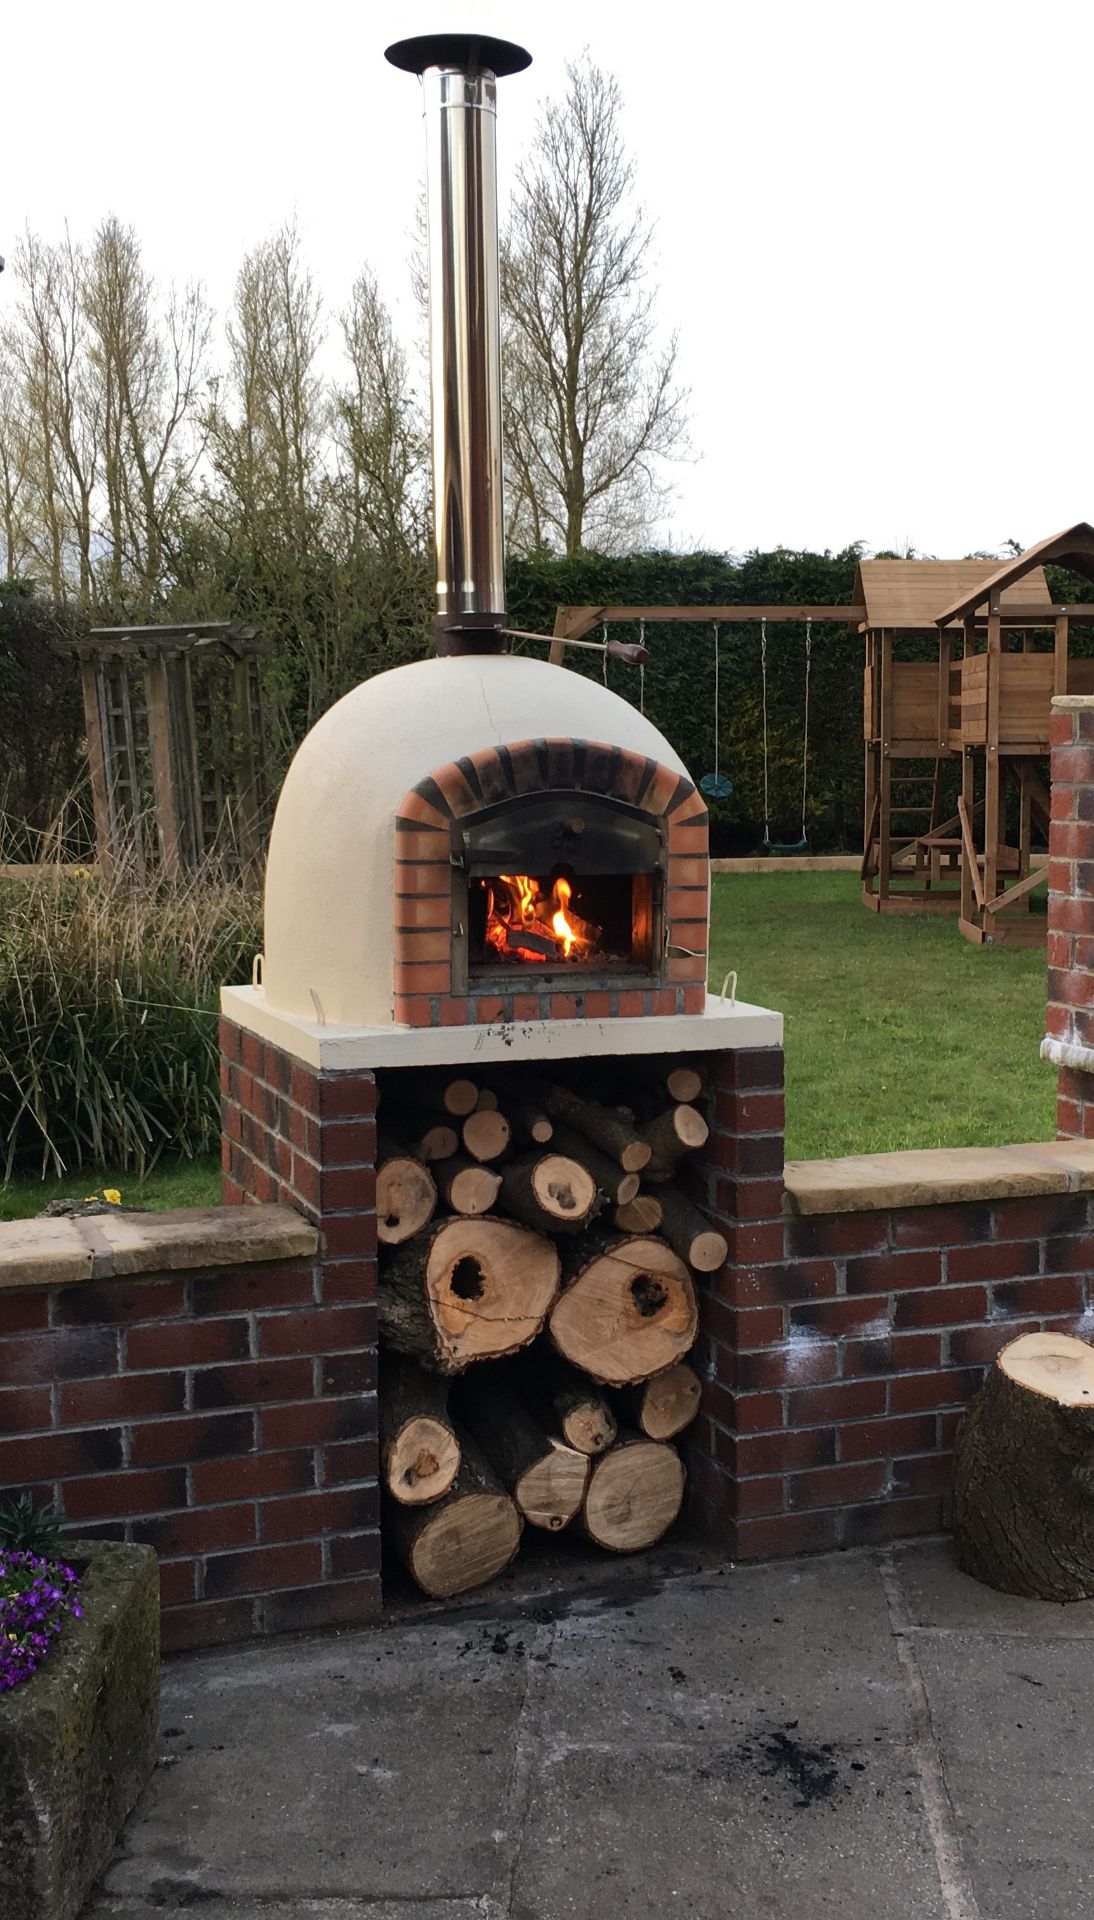 NEW CRATED 90CM TRADITIONAL HANDMADE WOOD FIRED BRICK PIZZA OVEN, INDOOR/OUTDOOR, C/W STAINLESS CHIM